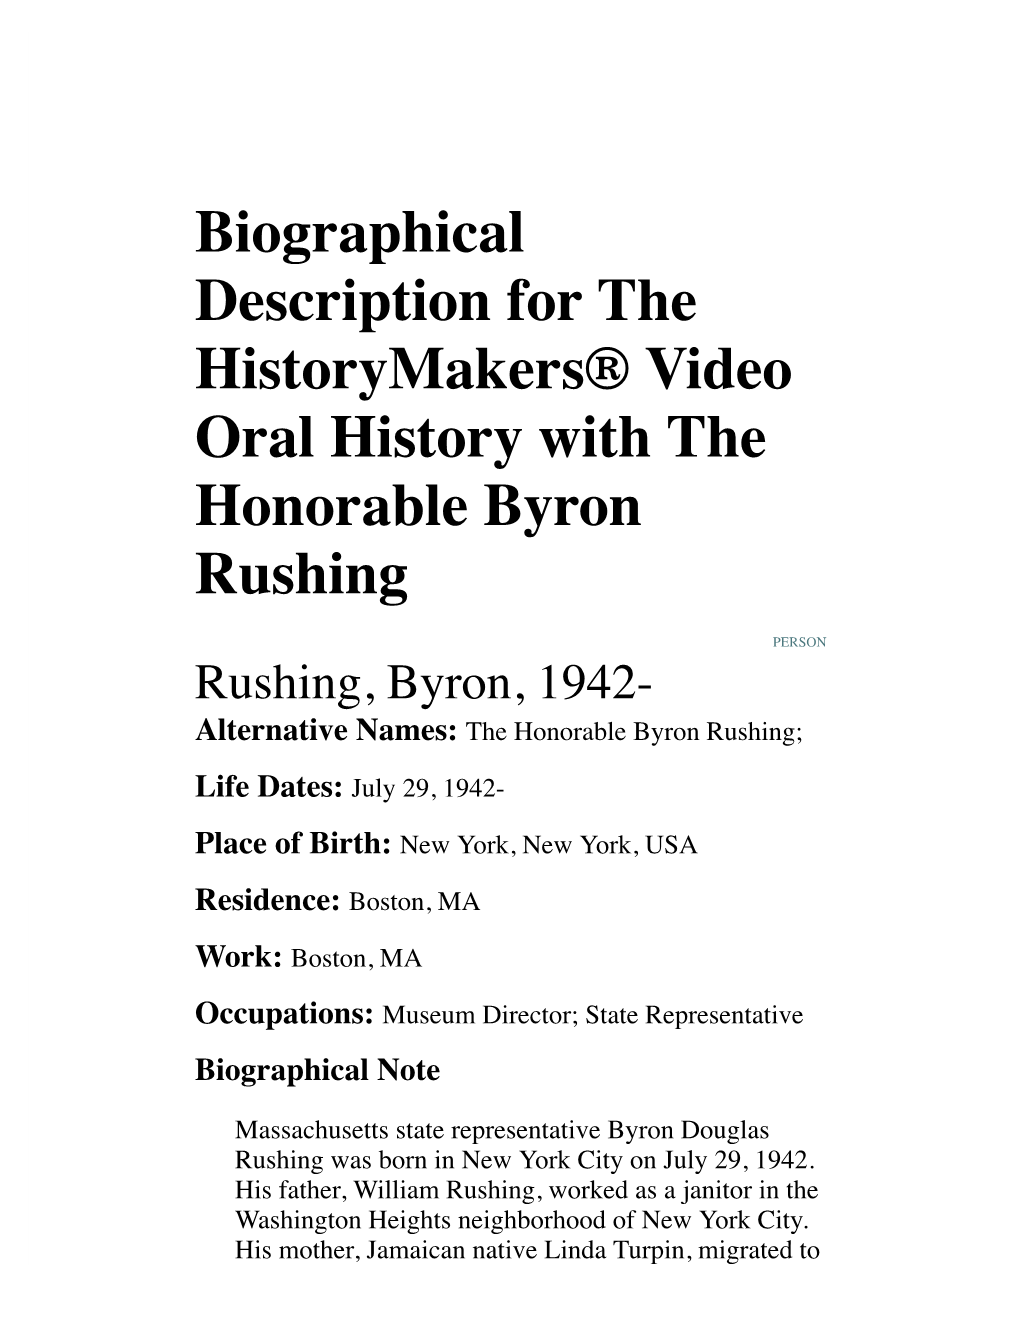 Biographical Description for the Historymakers® Video Oral History with the Honorable Byron Rushing